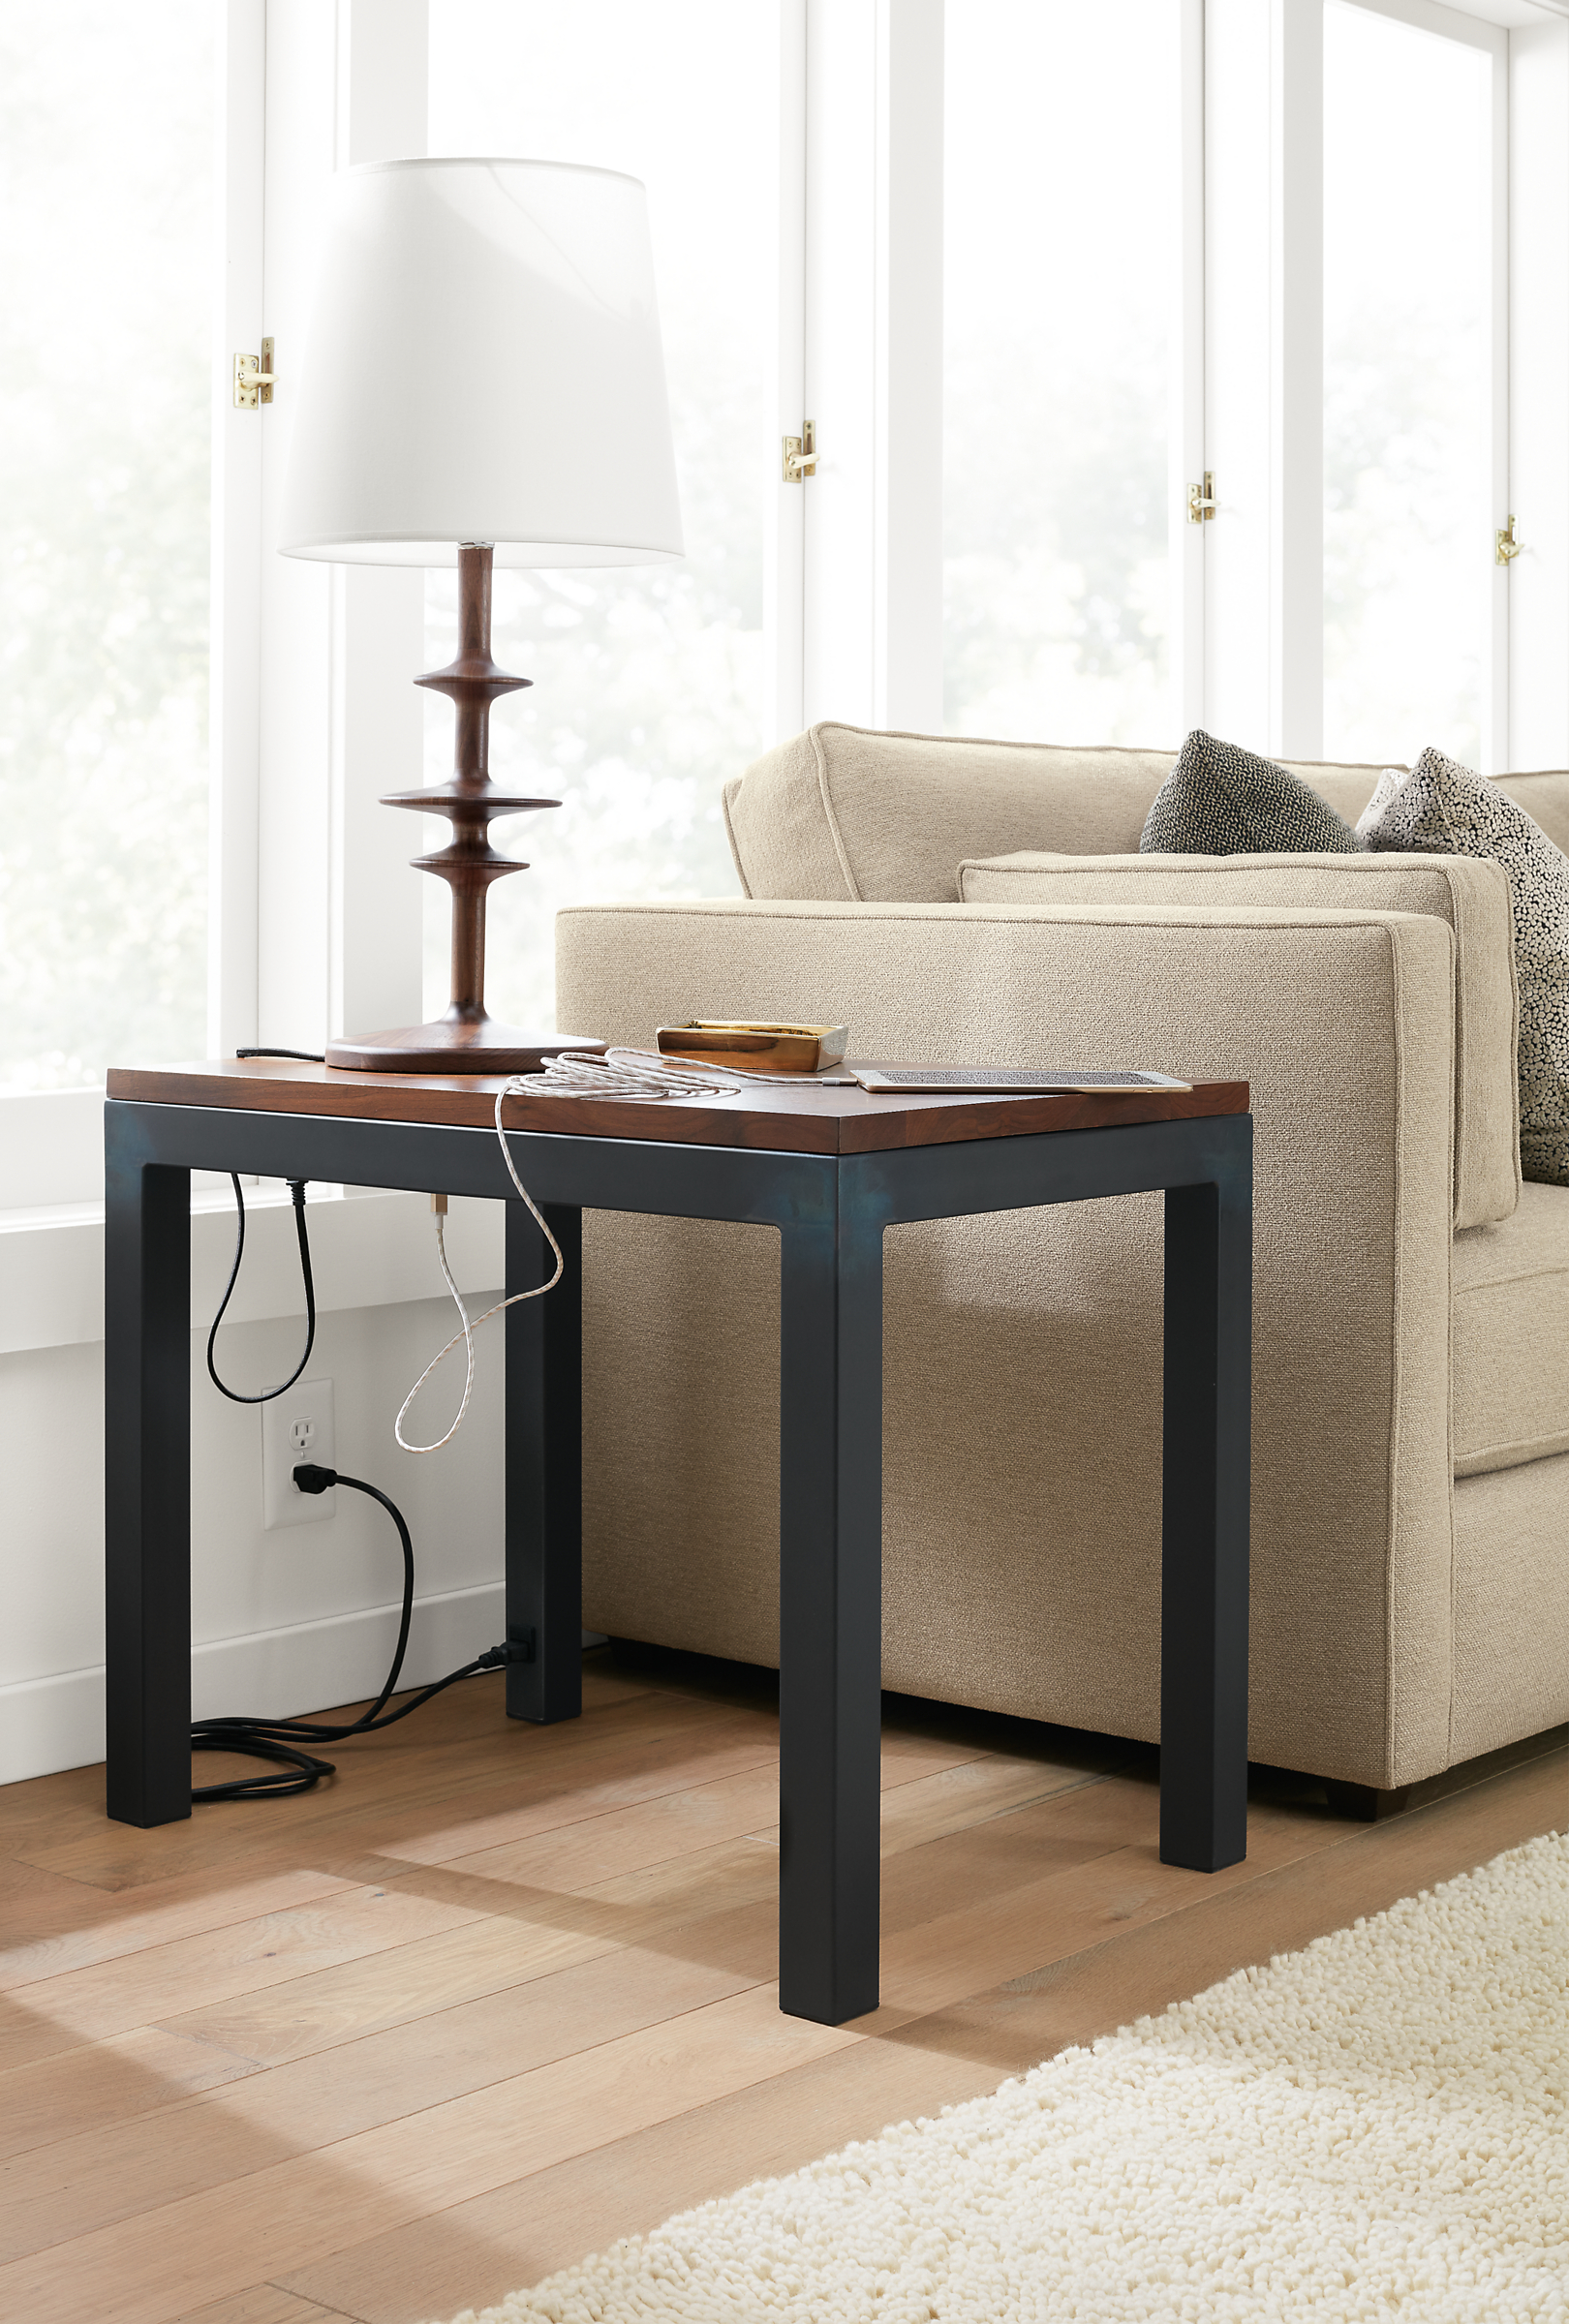 Detail of Parsons end table with power and USB.